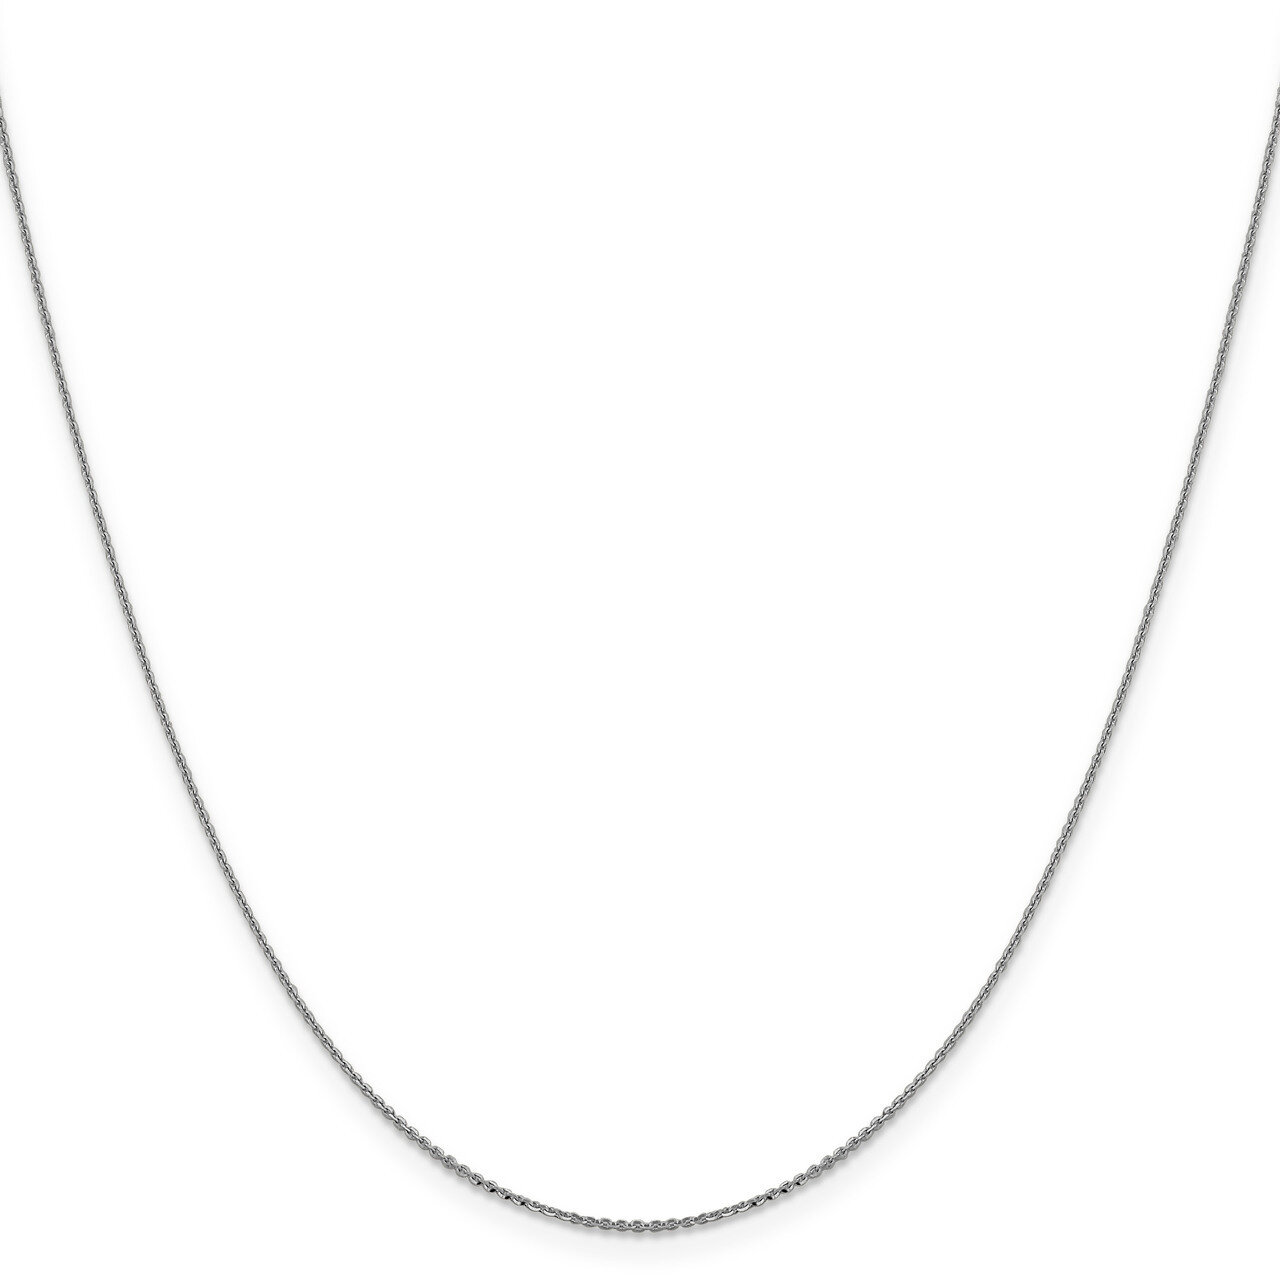 1 mm Diamond-cut Cable Chain 18 Inch 14K White Gold HB-1254-18